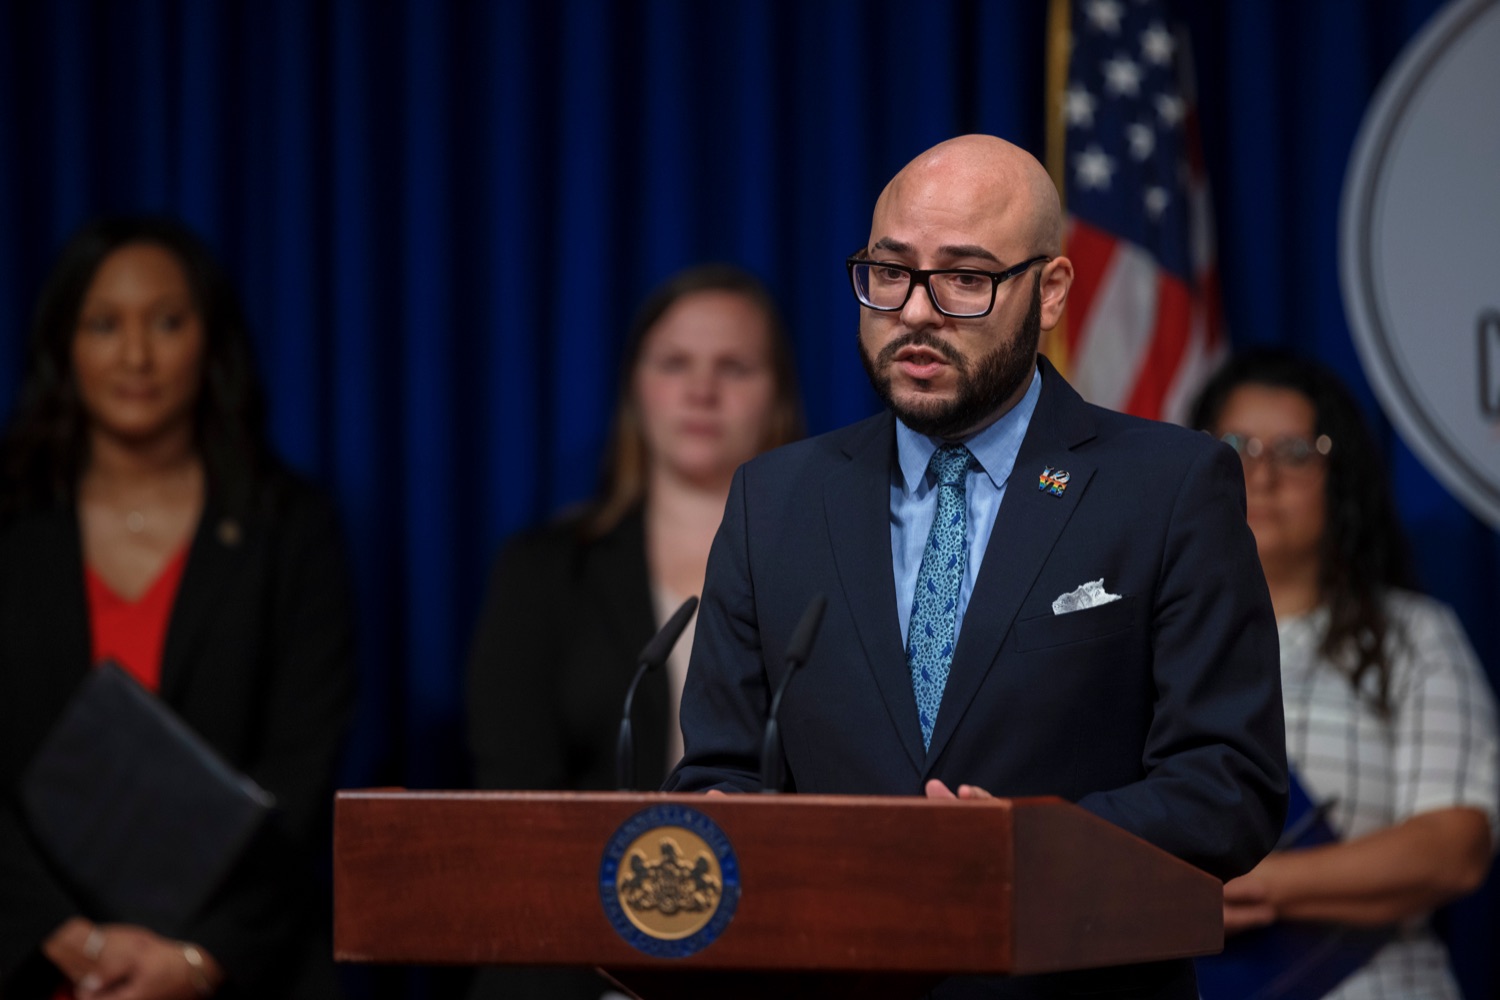 Rafael Alvarez Febo, executive director of the Commission on LGBTQ Affairs, speaks during a press conference, which highlighted the Wolf Administrations efforts to expand voter access, inside the Capitol Media Center on Tuesday, September 13, 2022. The press conference reminded Pennsylvanians Oct 24. is the deadline to register to vote in the November election. Whether a voter is requesting a no-excuse mail-in ballot from the comfort of their home or showing up to the polls on Election Day and proudly wearing an I voted sticker, voting is a constitutional right and a way for people to make their voice heard, Acting Secretary of State Leigh M. Chapman said. I am honored to be part of an administration that continues to work hard so everyone has equal access to the ballot box. .<br><a href="https://filesource.amperwave.net/commonwealthofpa/photo/22138_CFW_VotingPA_NK_020.JPG" target="_blank">⇣ Download Photo</a>